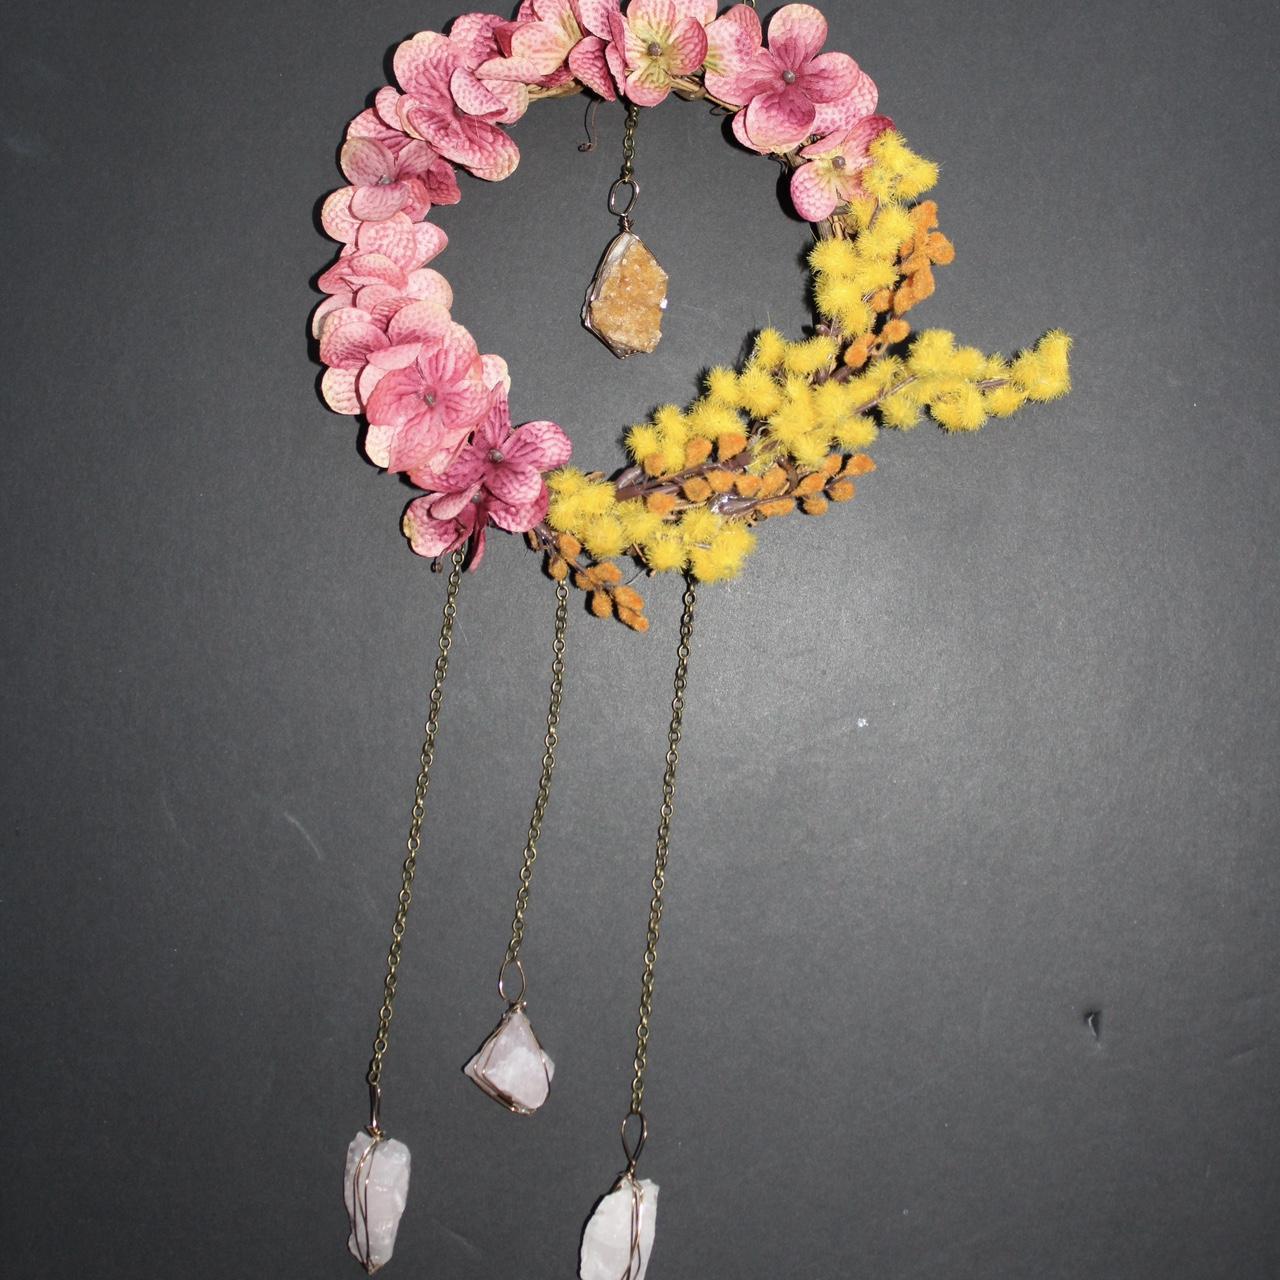 Handmade crystal dream catchers made with real dried - Depop